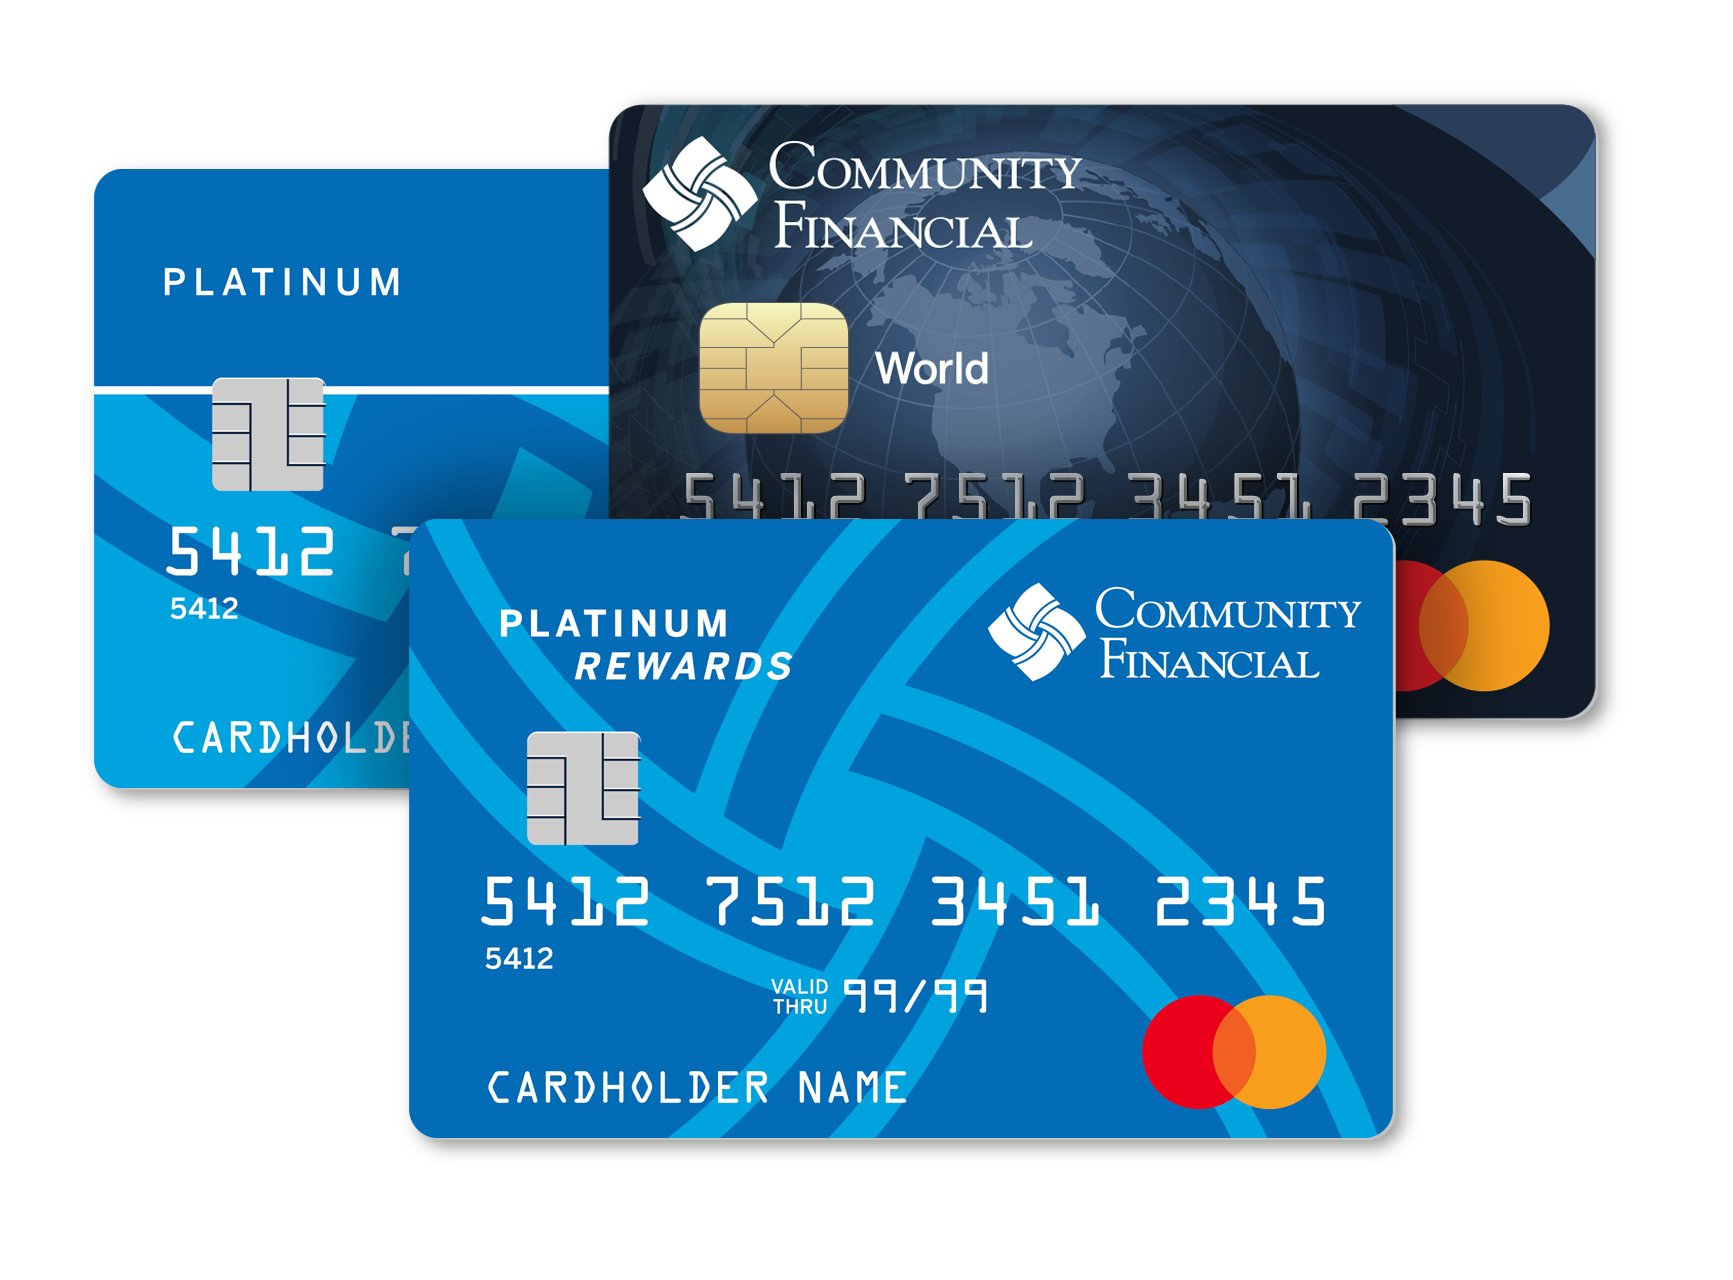 Community Financial Credit Cards